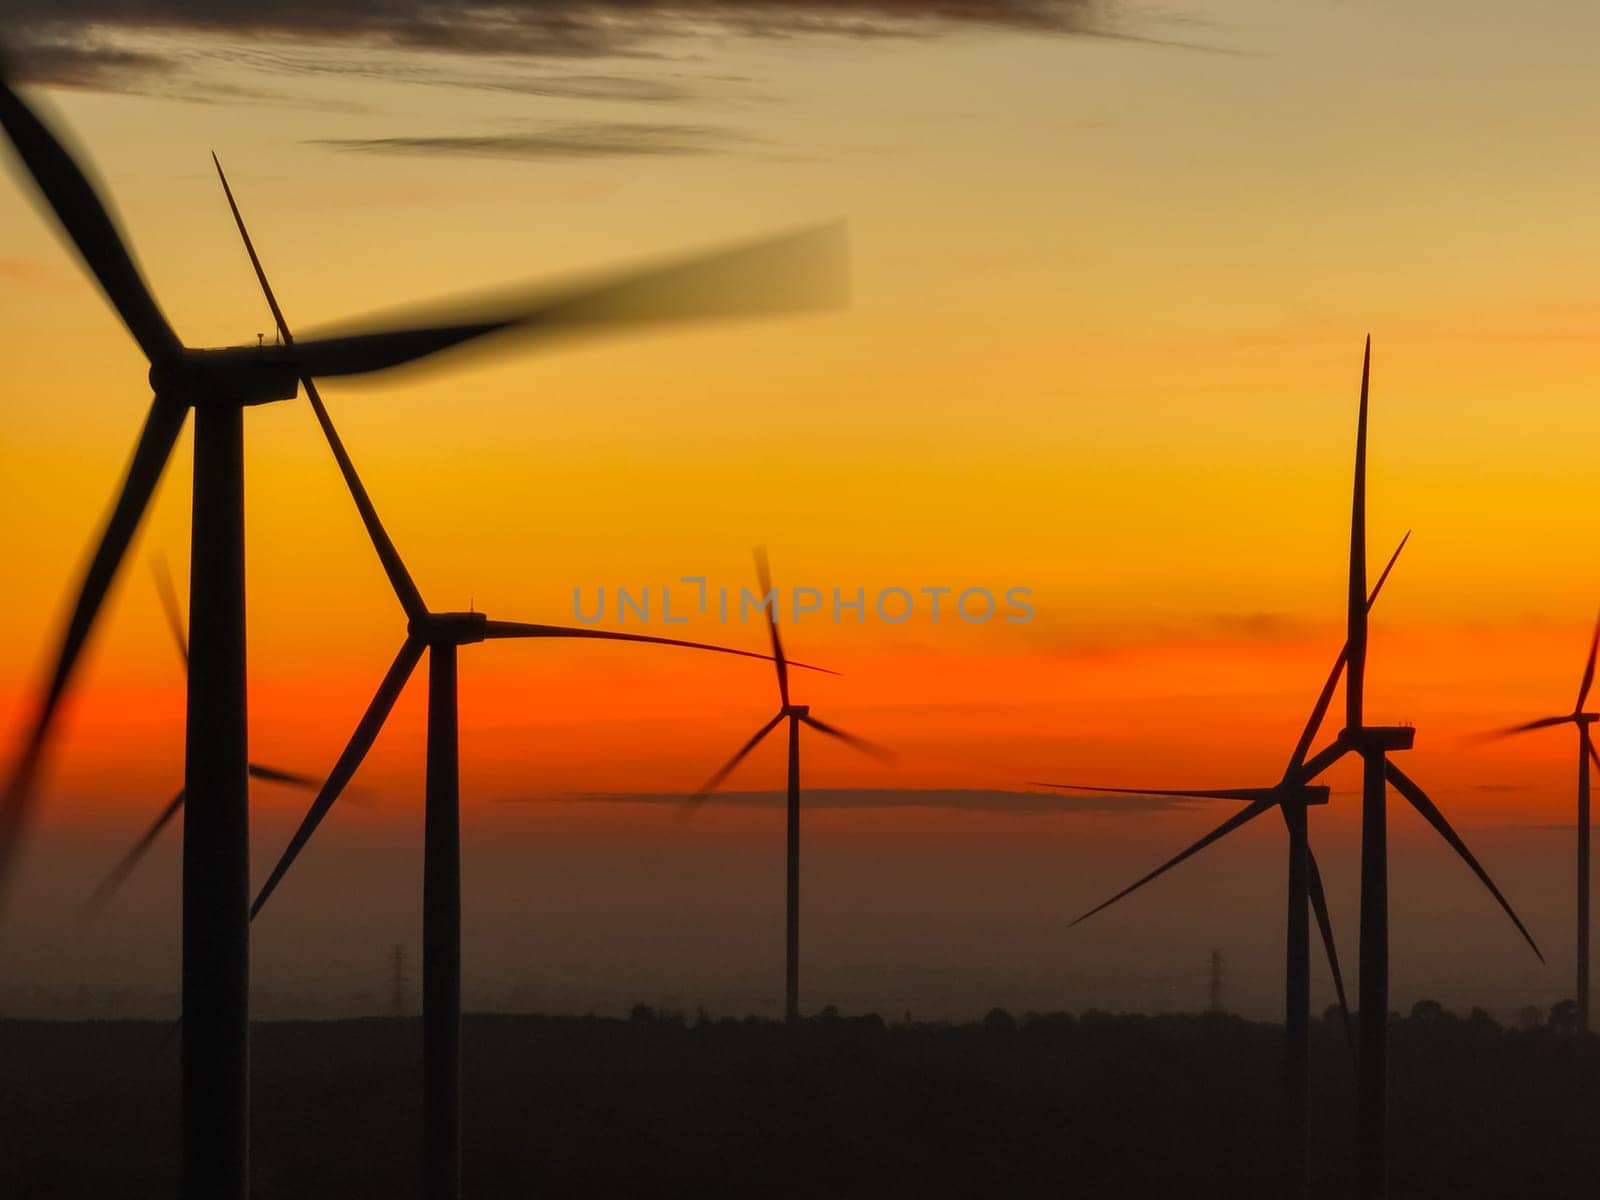 Wind farm landscape against sunset sky. Wind energy. Wind power. Sustainable and renewable energy. Wind turbines generate electricity. Green technology. Renewable resources. Sustainable development. by Fahroni